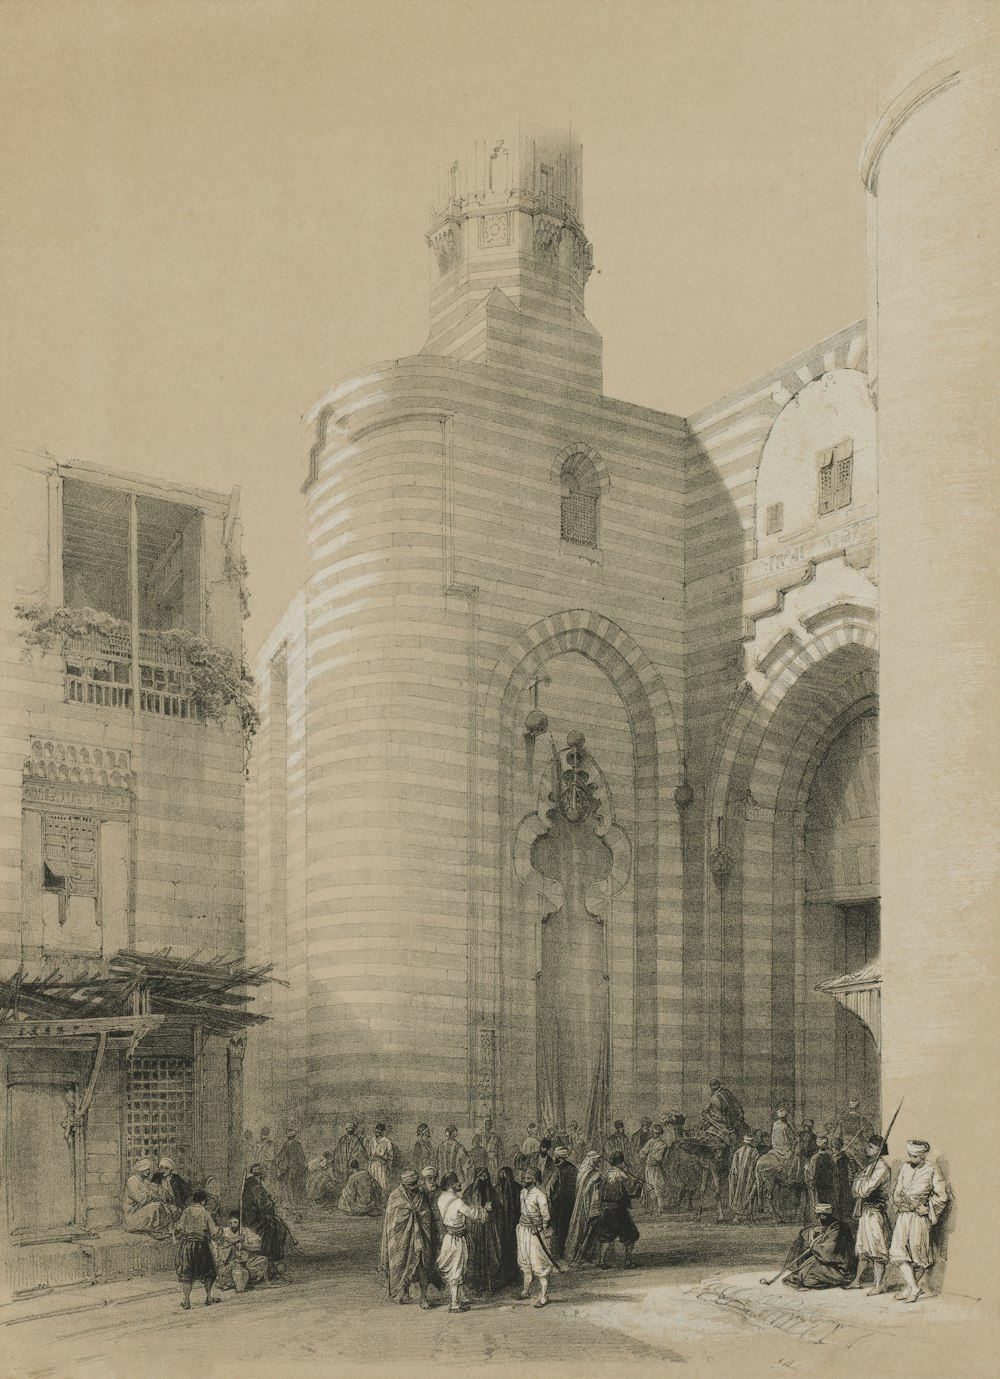 a group of people standing in front of a tall building